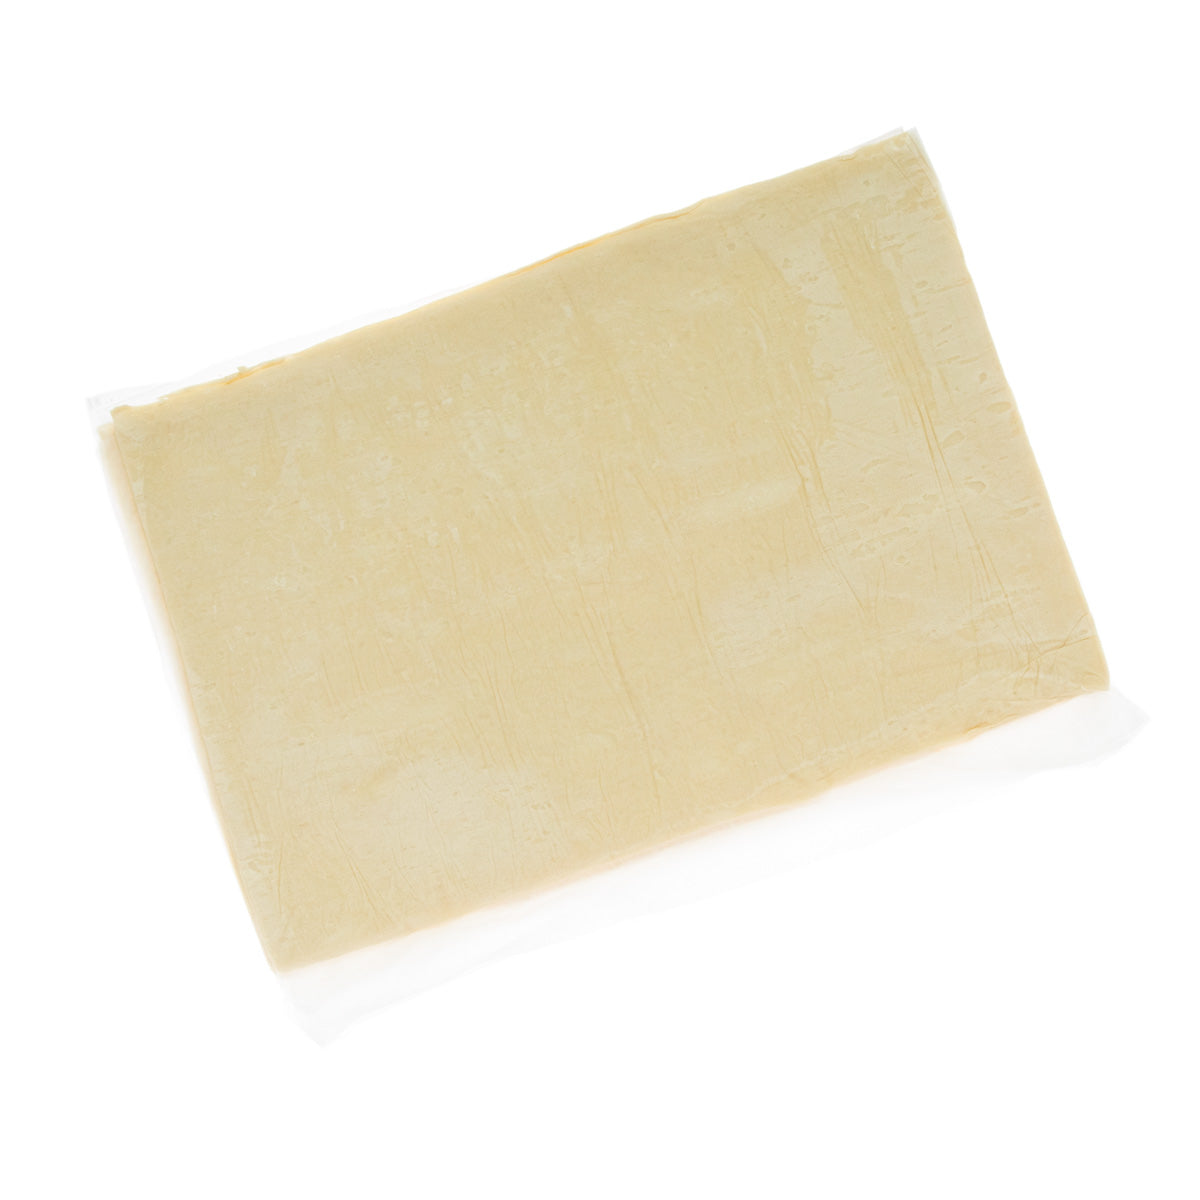 Dufour Pastry Kitchens Plant Based Pastry Dough Sheets